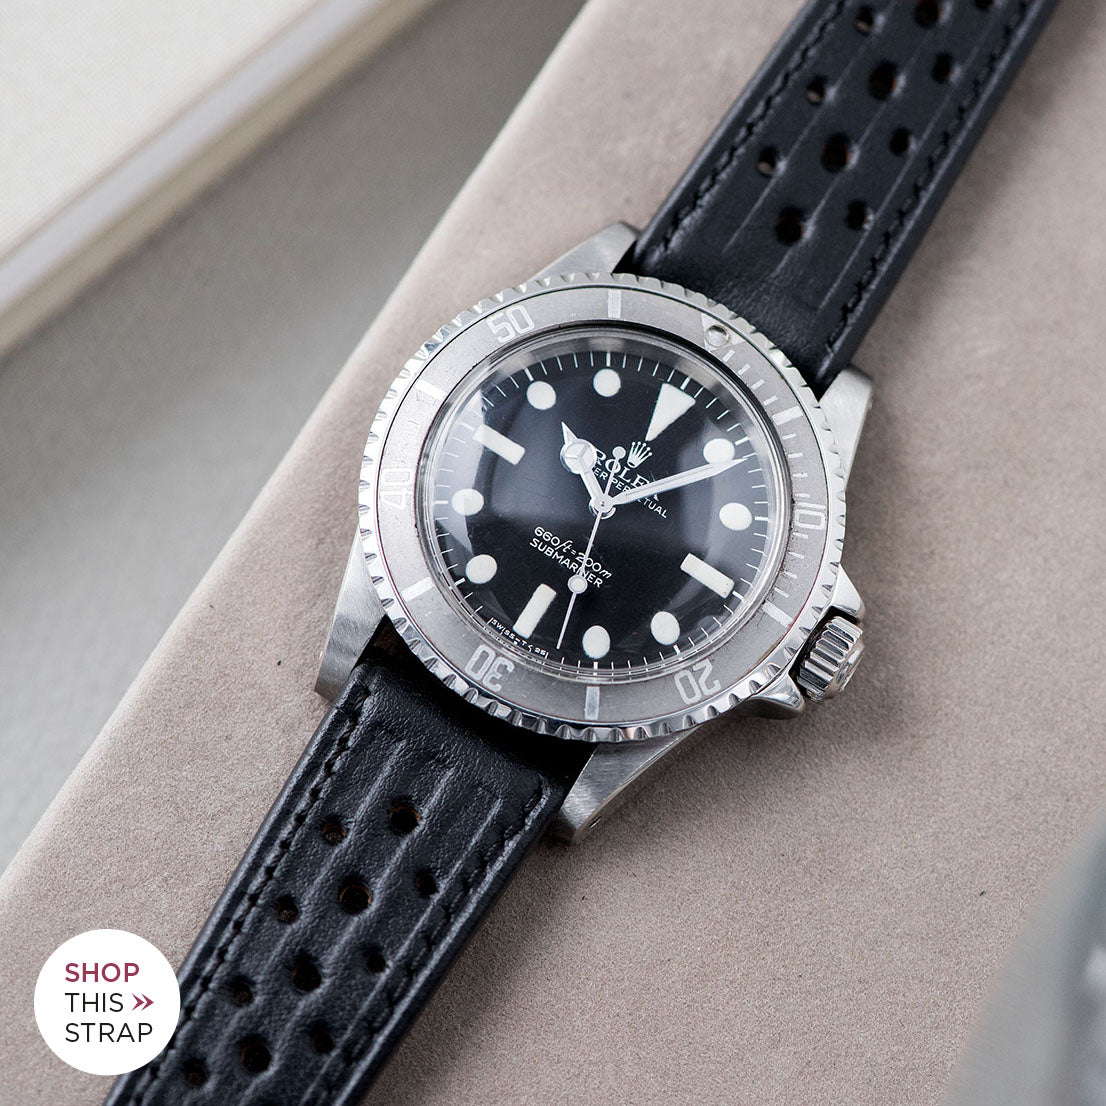 Bulang and Sons_Strap Guide_The Rolex 5513 Faded Maxi Submariner_Racing Black Speedy Leather Watch Strap